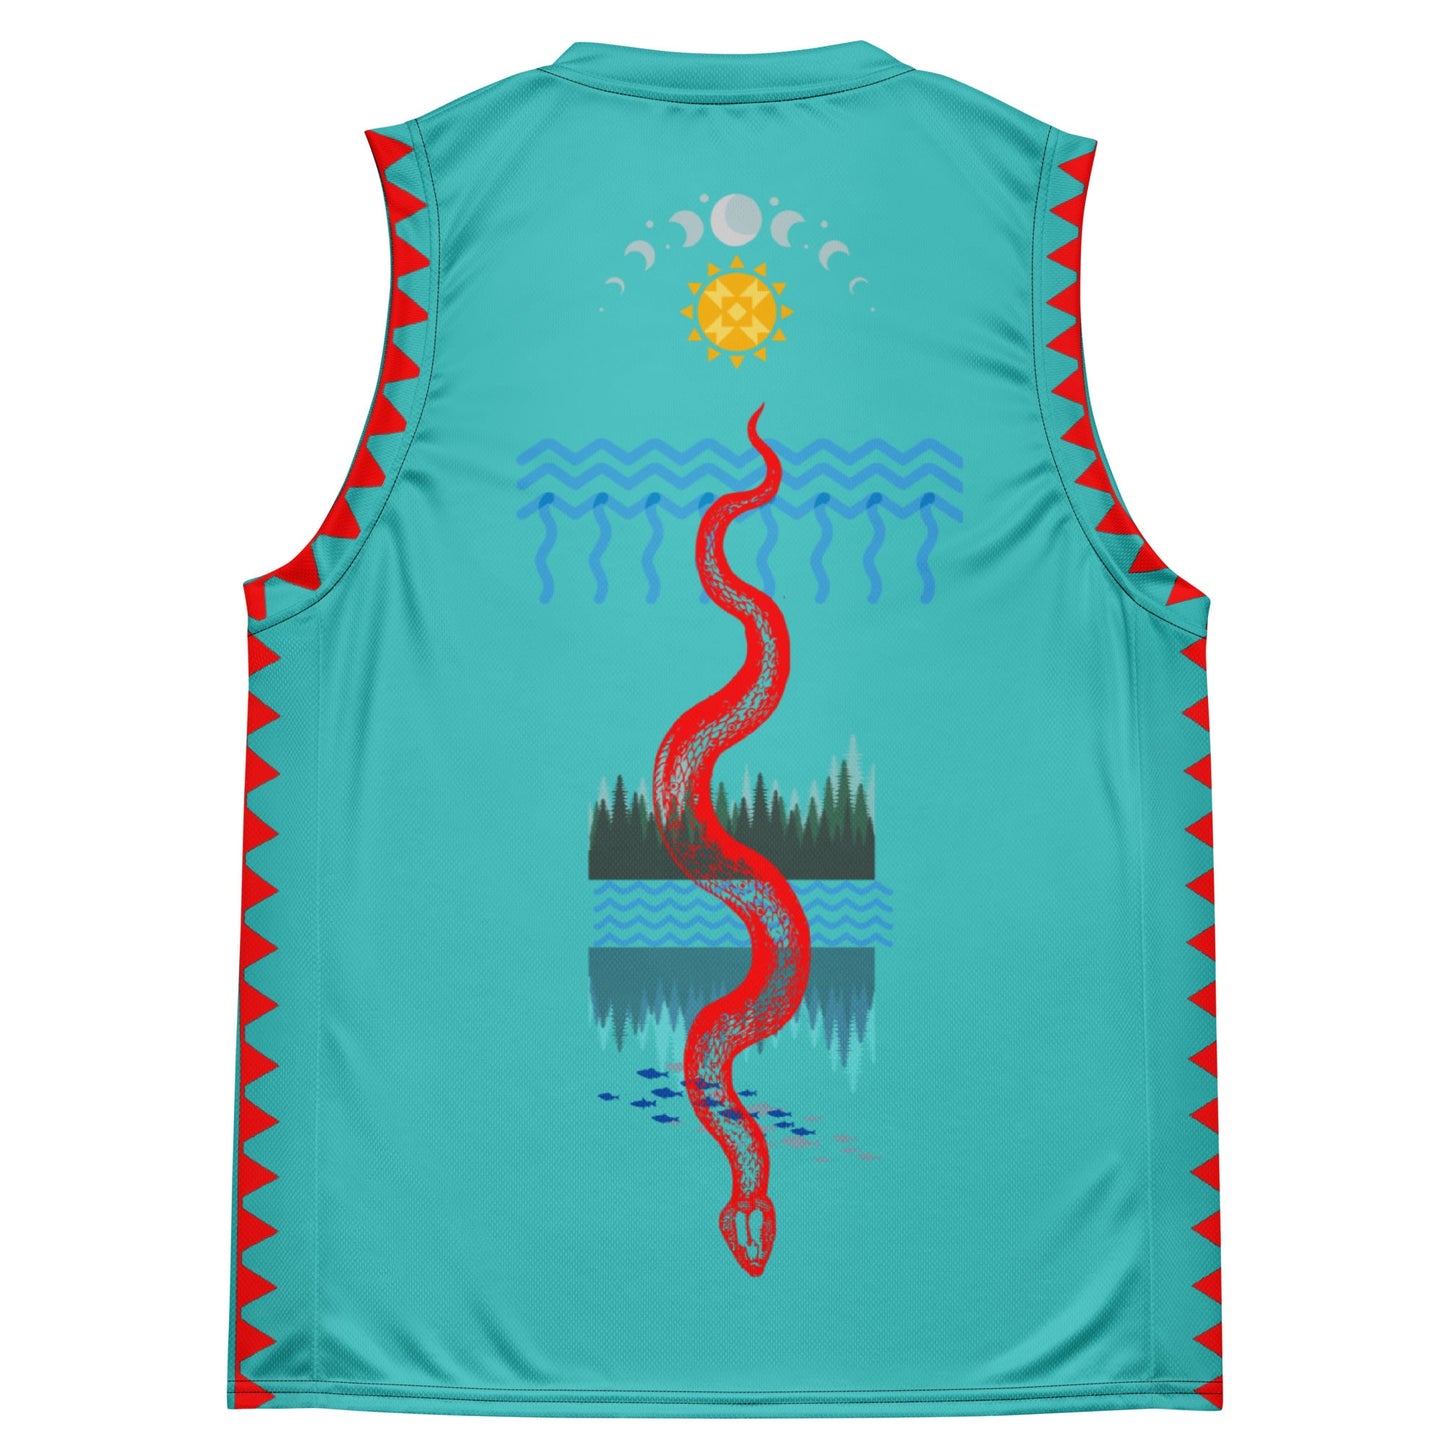 Water is Life Recycled unisex basketball jersey - Nikikw Designs